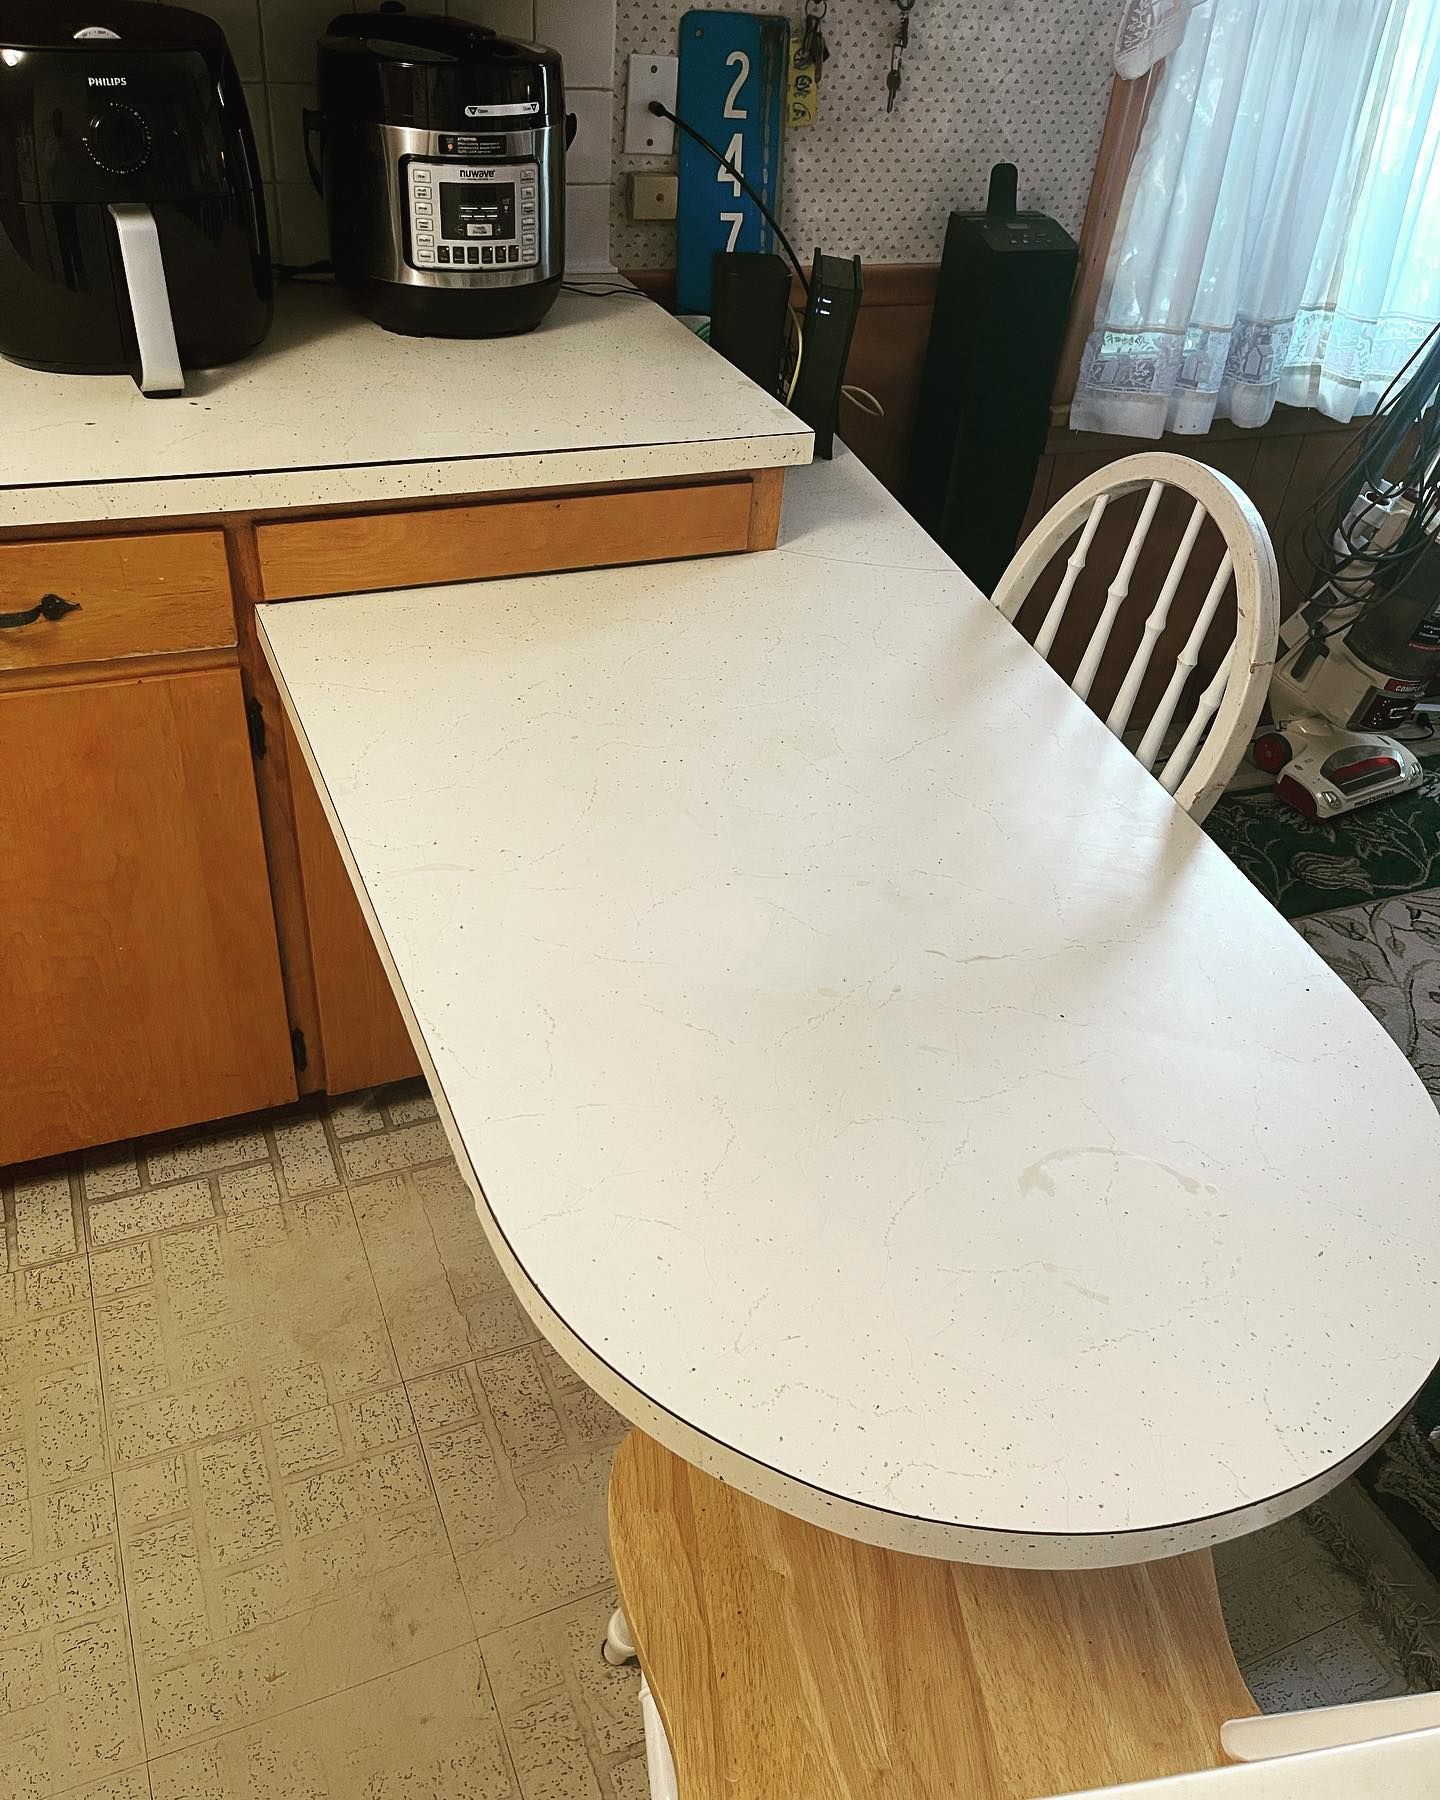 After is a spotless kitchen with a very shiny white table and a chair